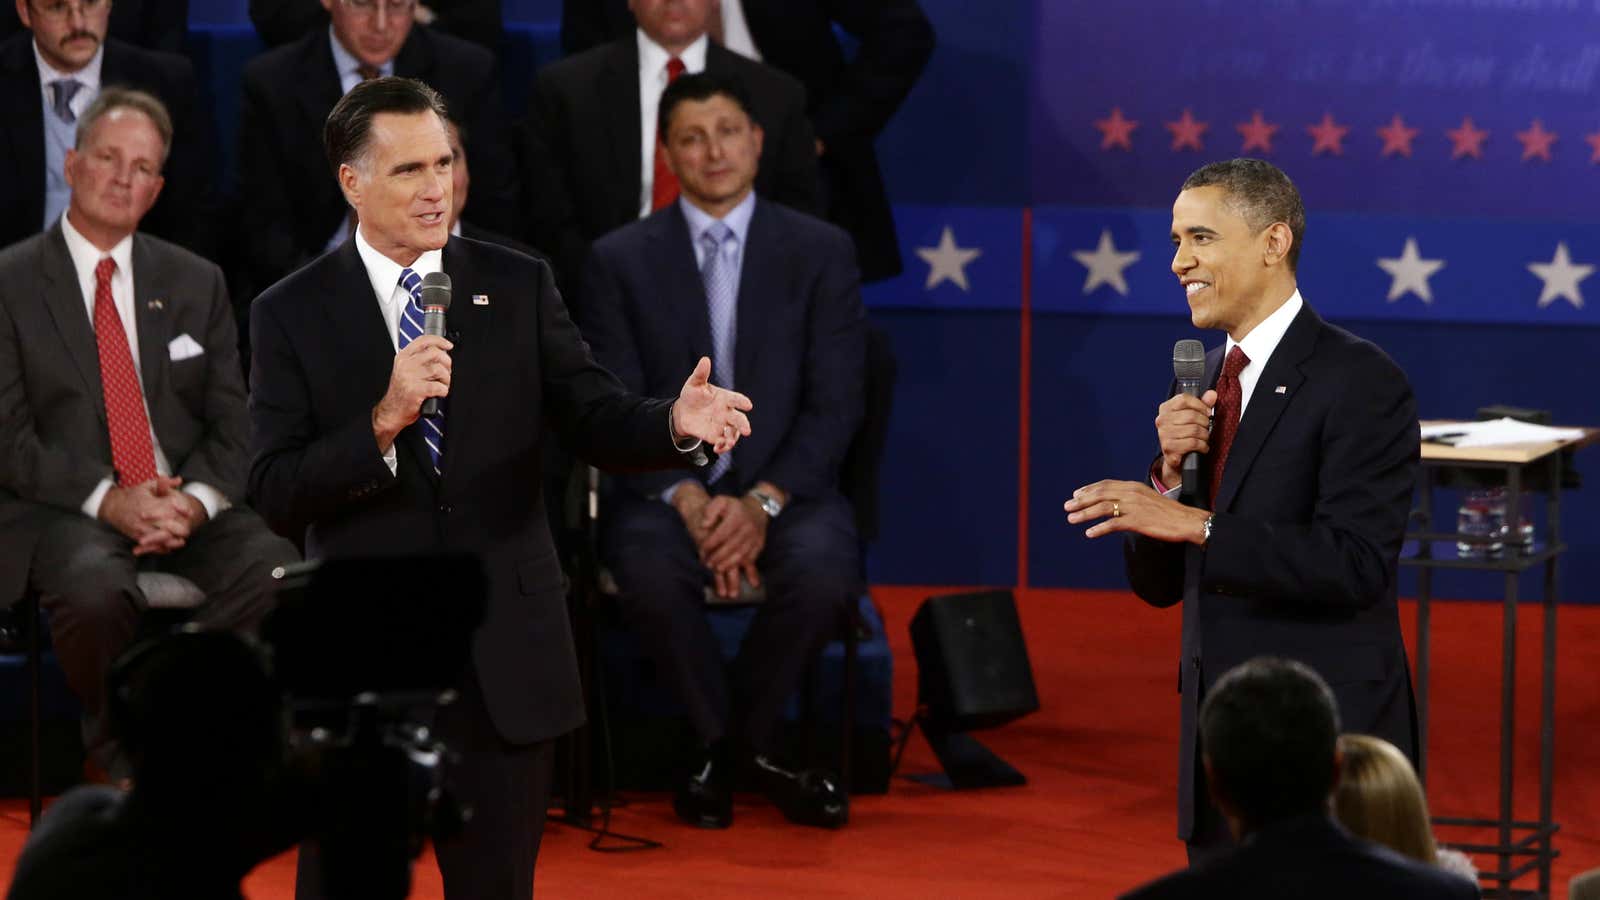 President Obama turned in a better performance in the town-hall format than the first debate.